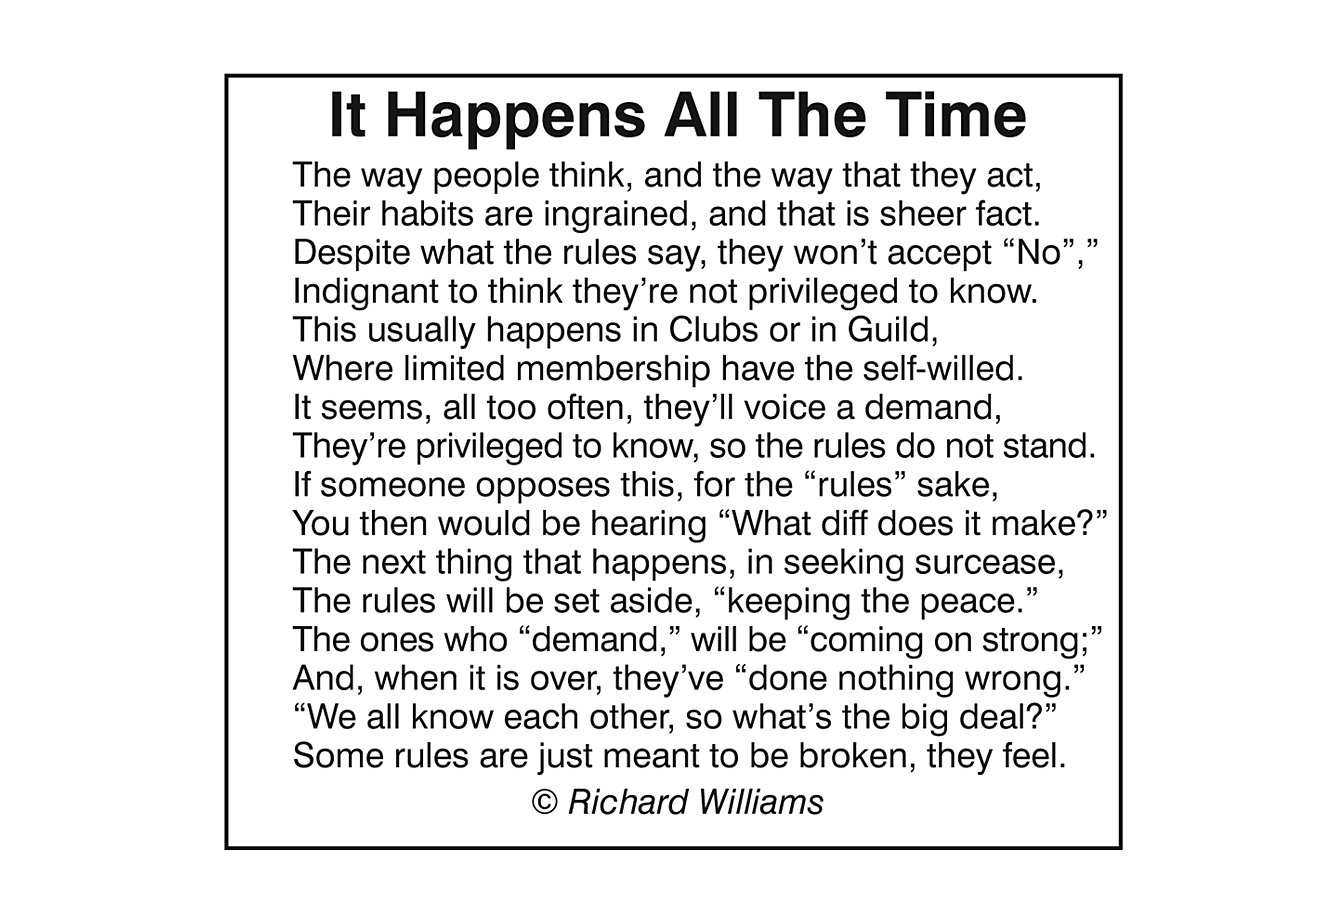 Richard Williams Poem: It Happens All The Time